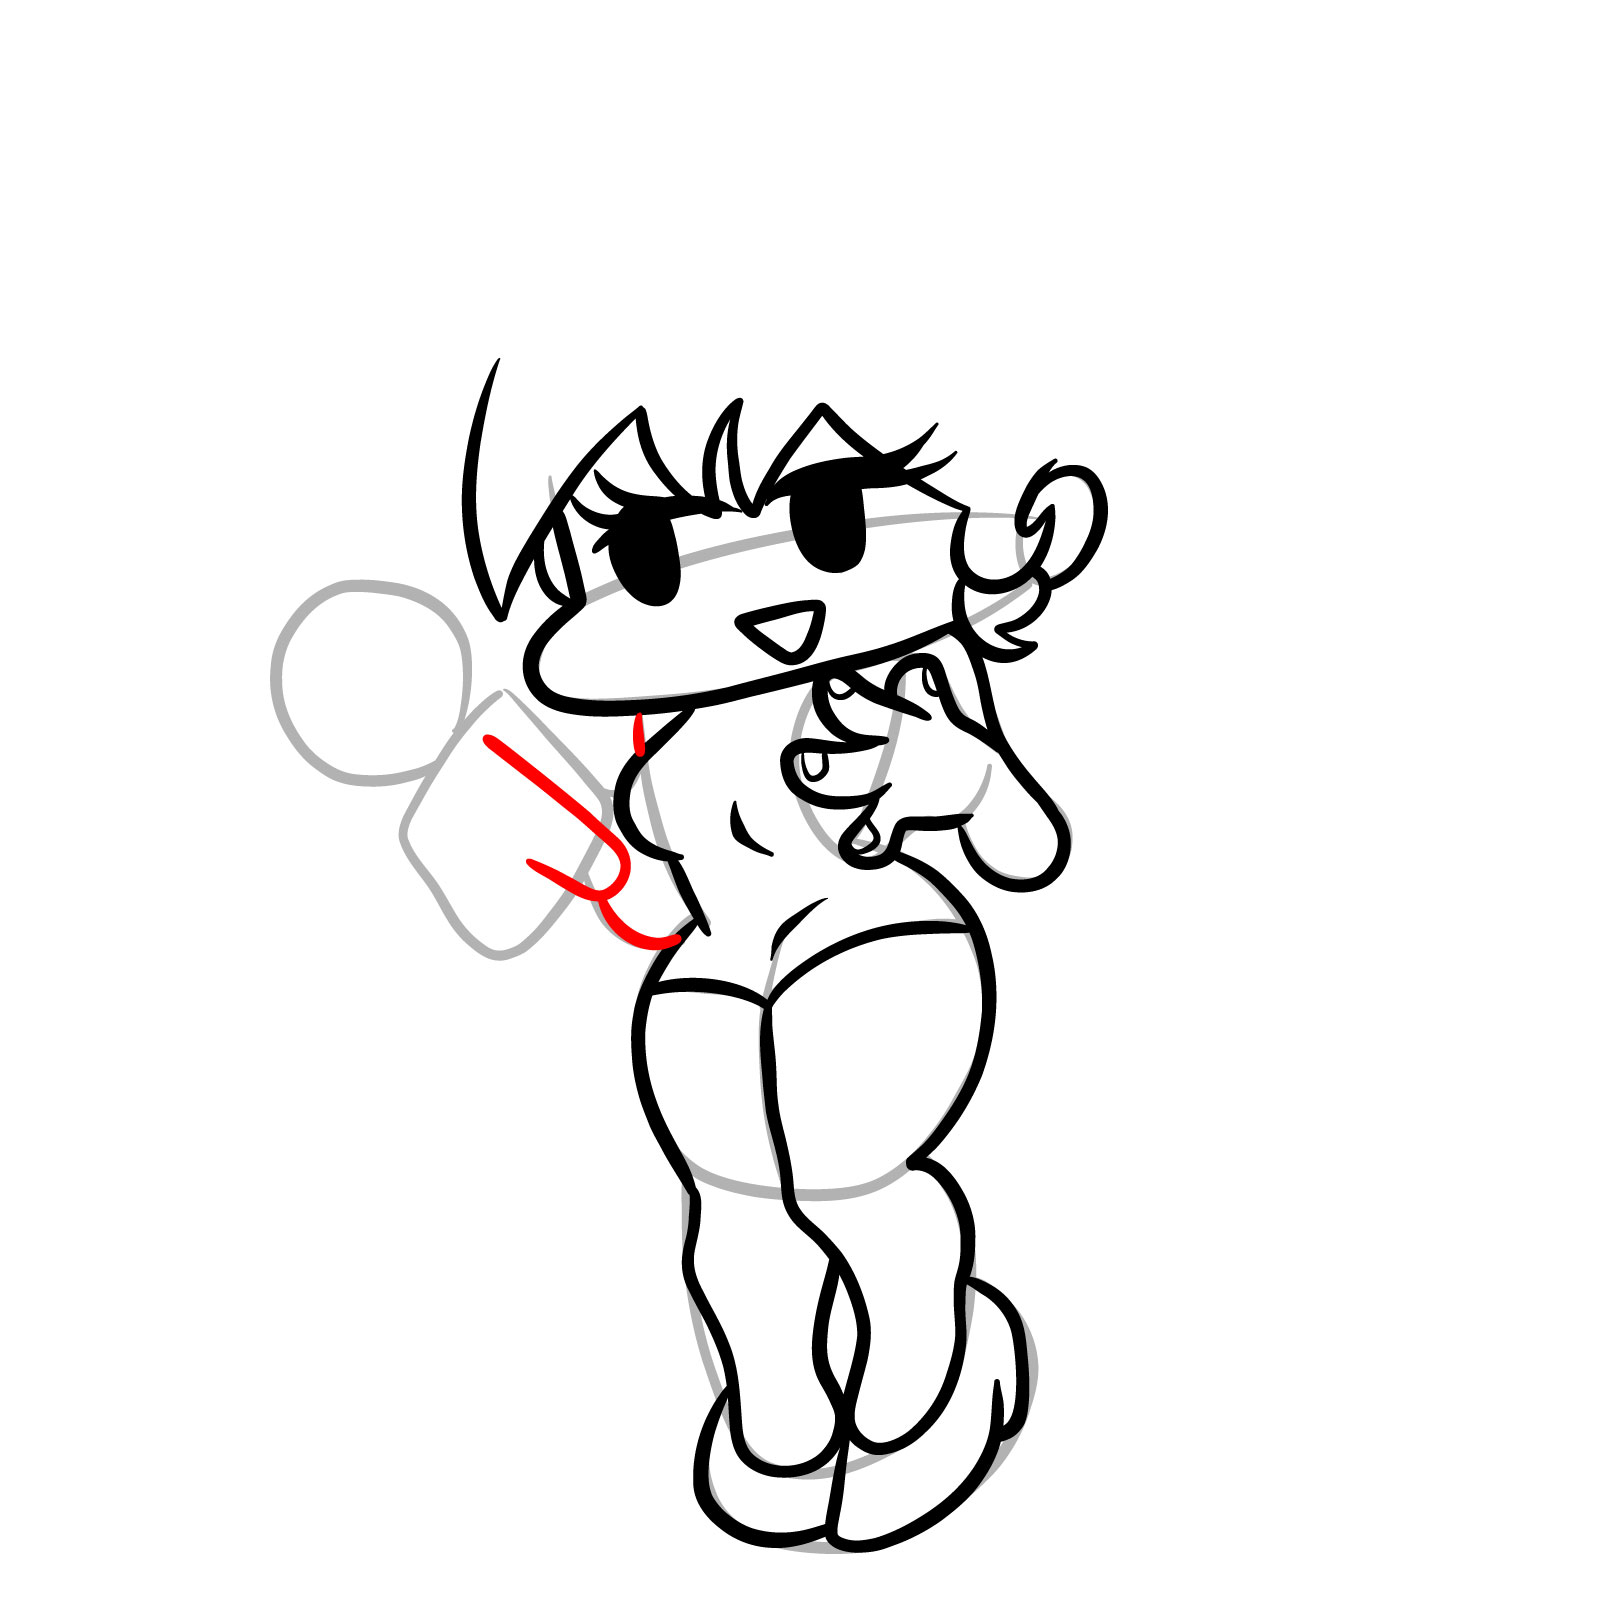 How to draw Playable GF from FNF - step 20